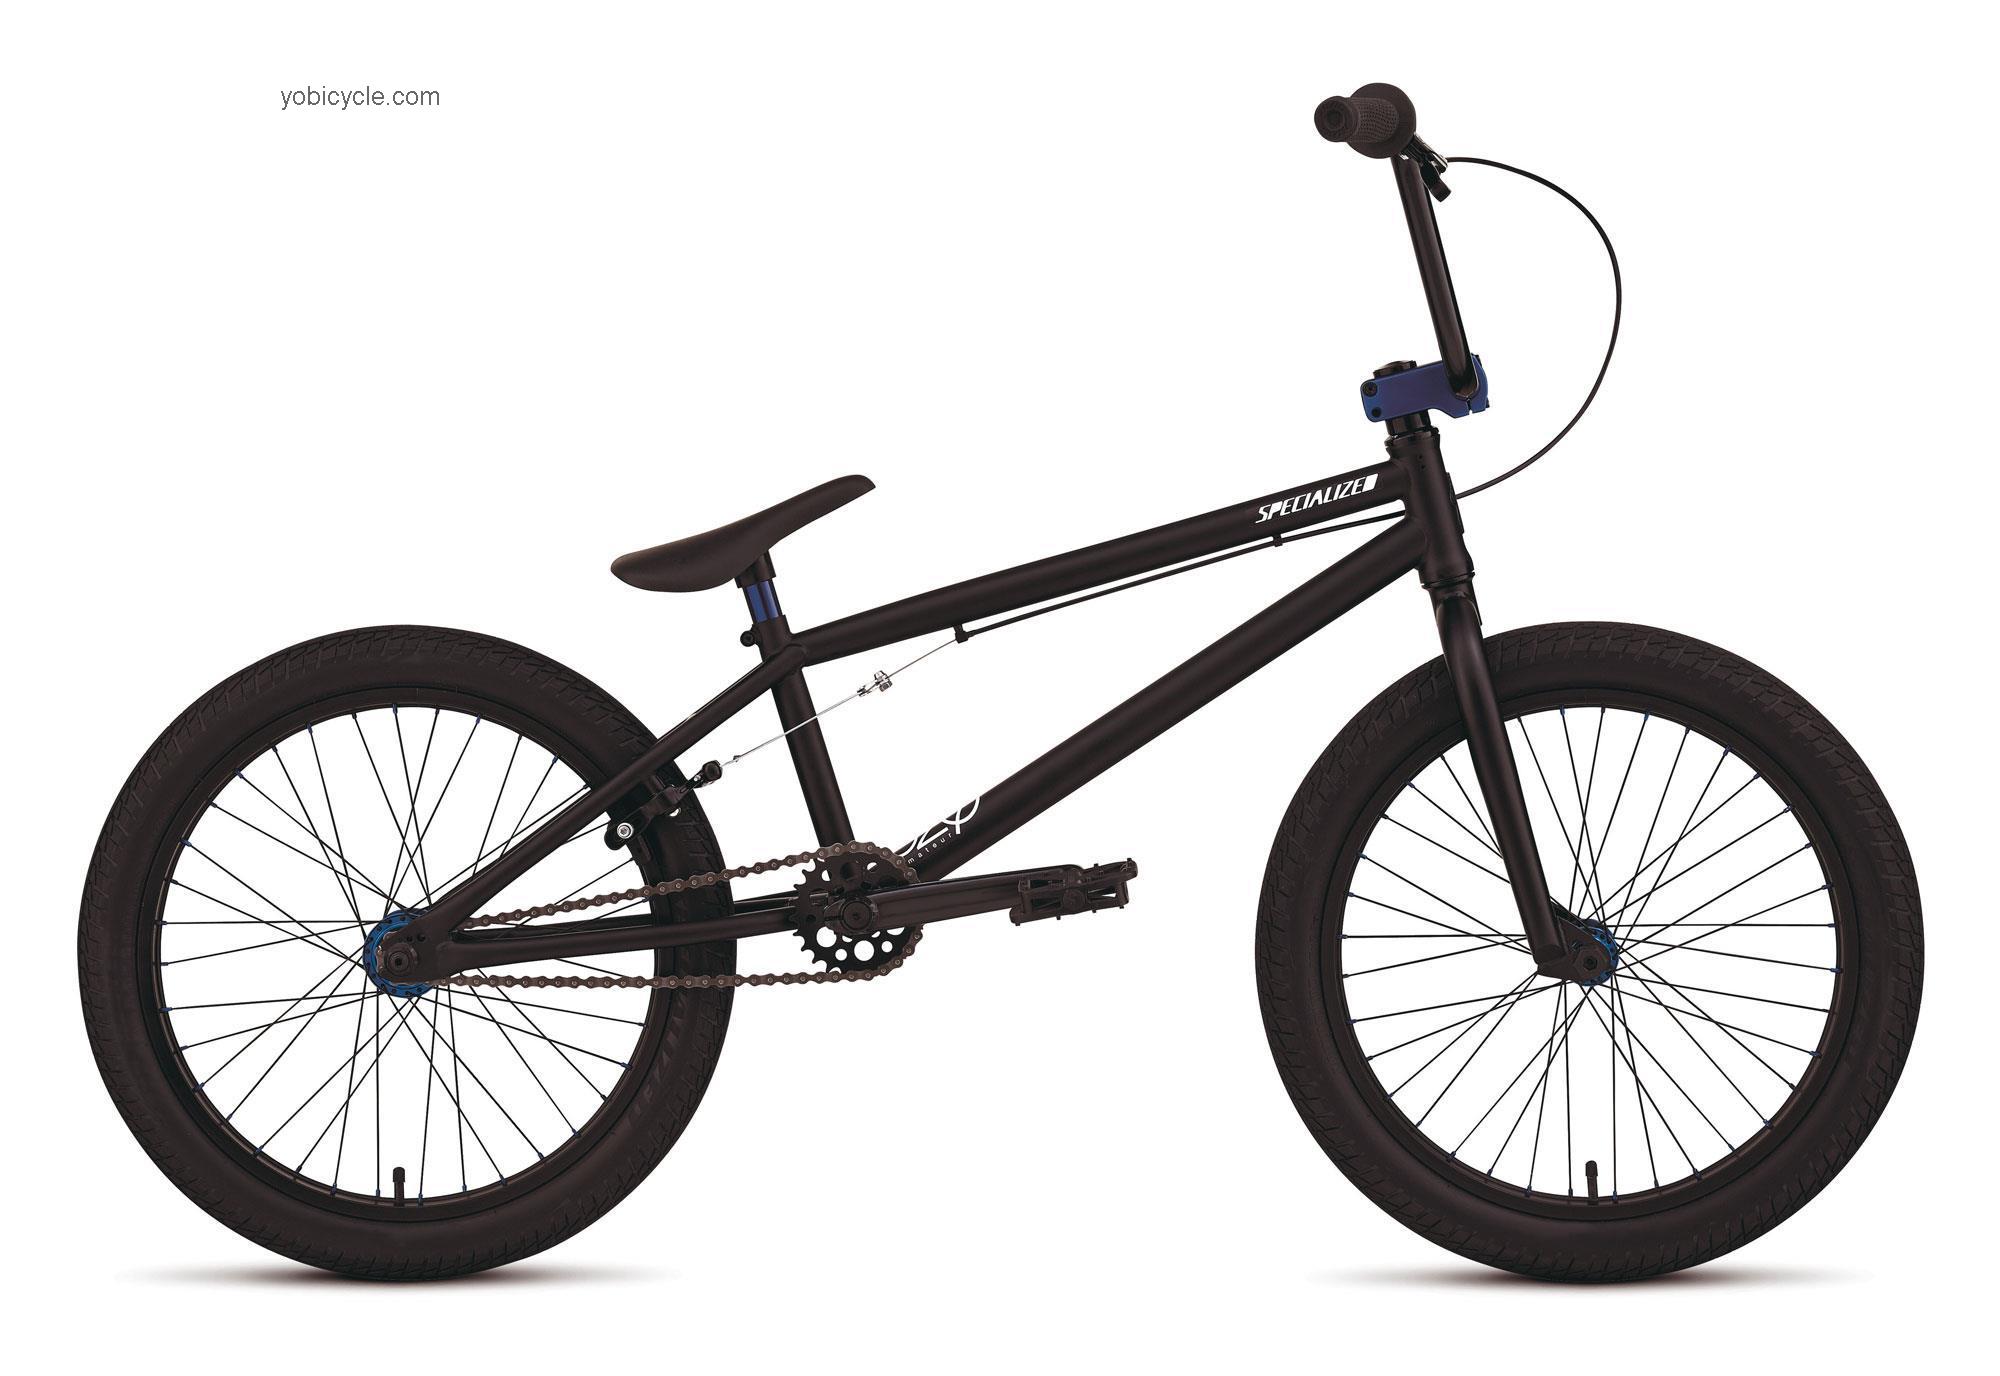 Specialized P20 AM 2012 comparison online with competitors